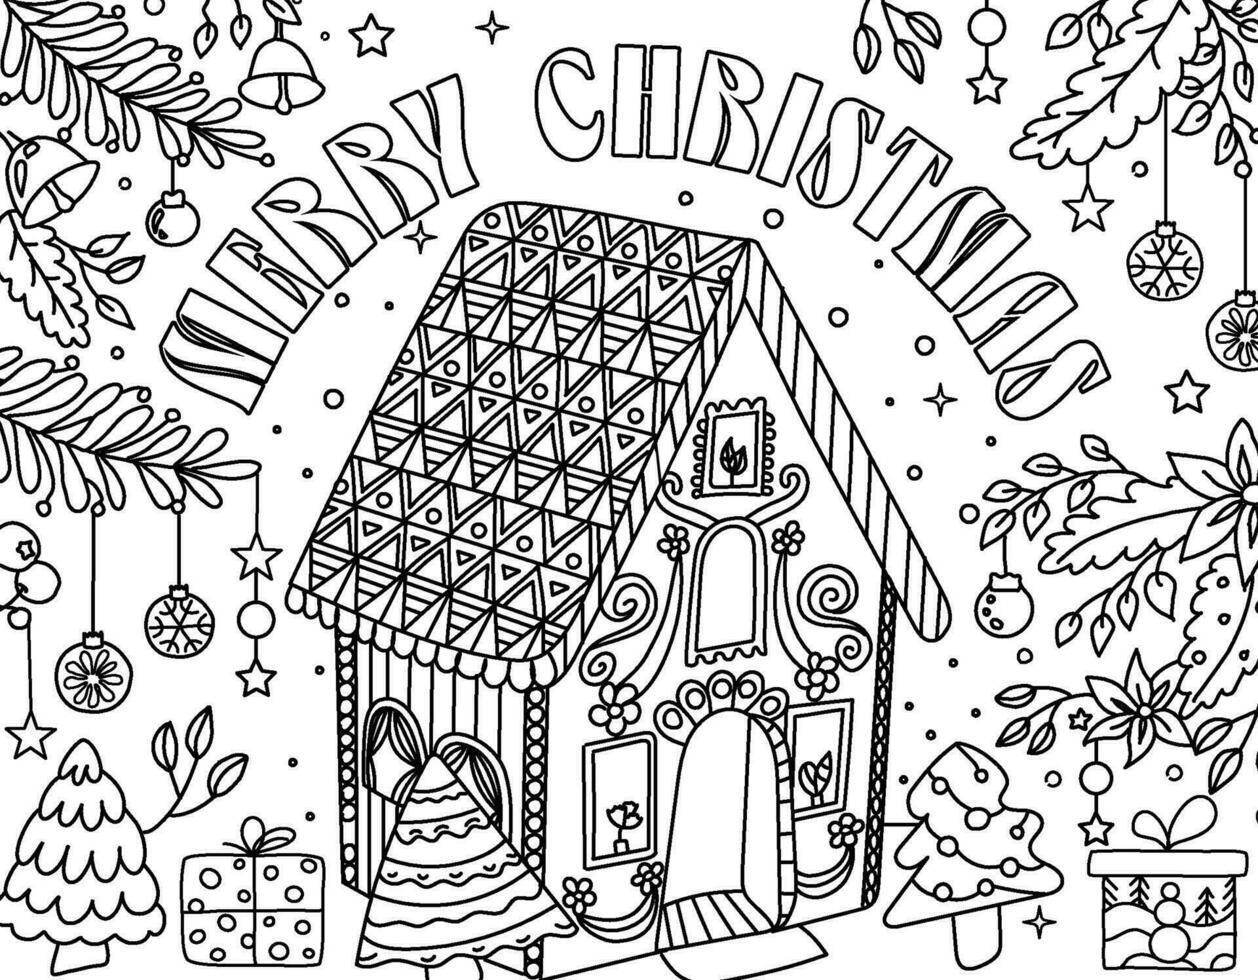 Hand drawing coloring page for kids and adults. Holiday greeting card Happy New Year 2024, Merry Christmas. Children Colouring book pictures. Christmas tree, house, snowflakes, eve decorations, carol vector